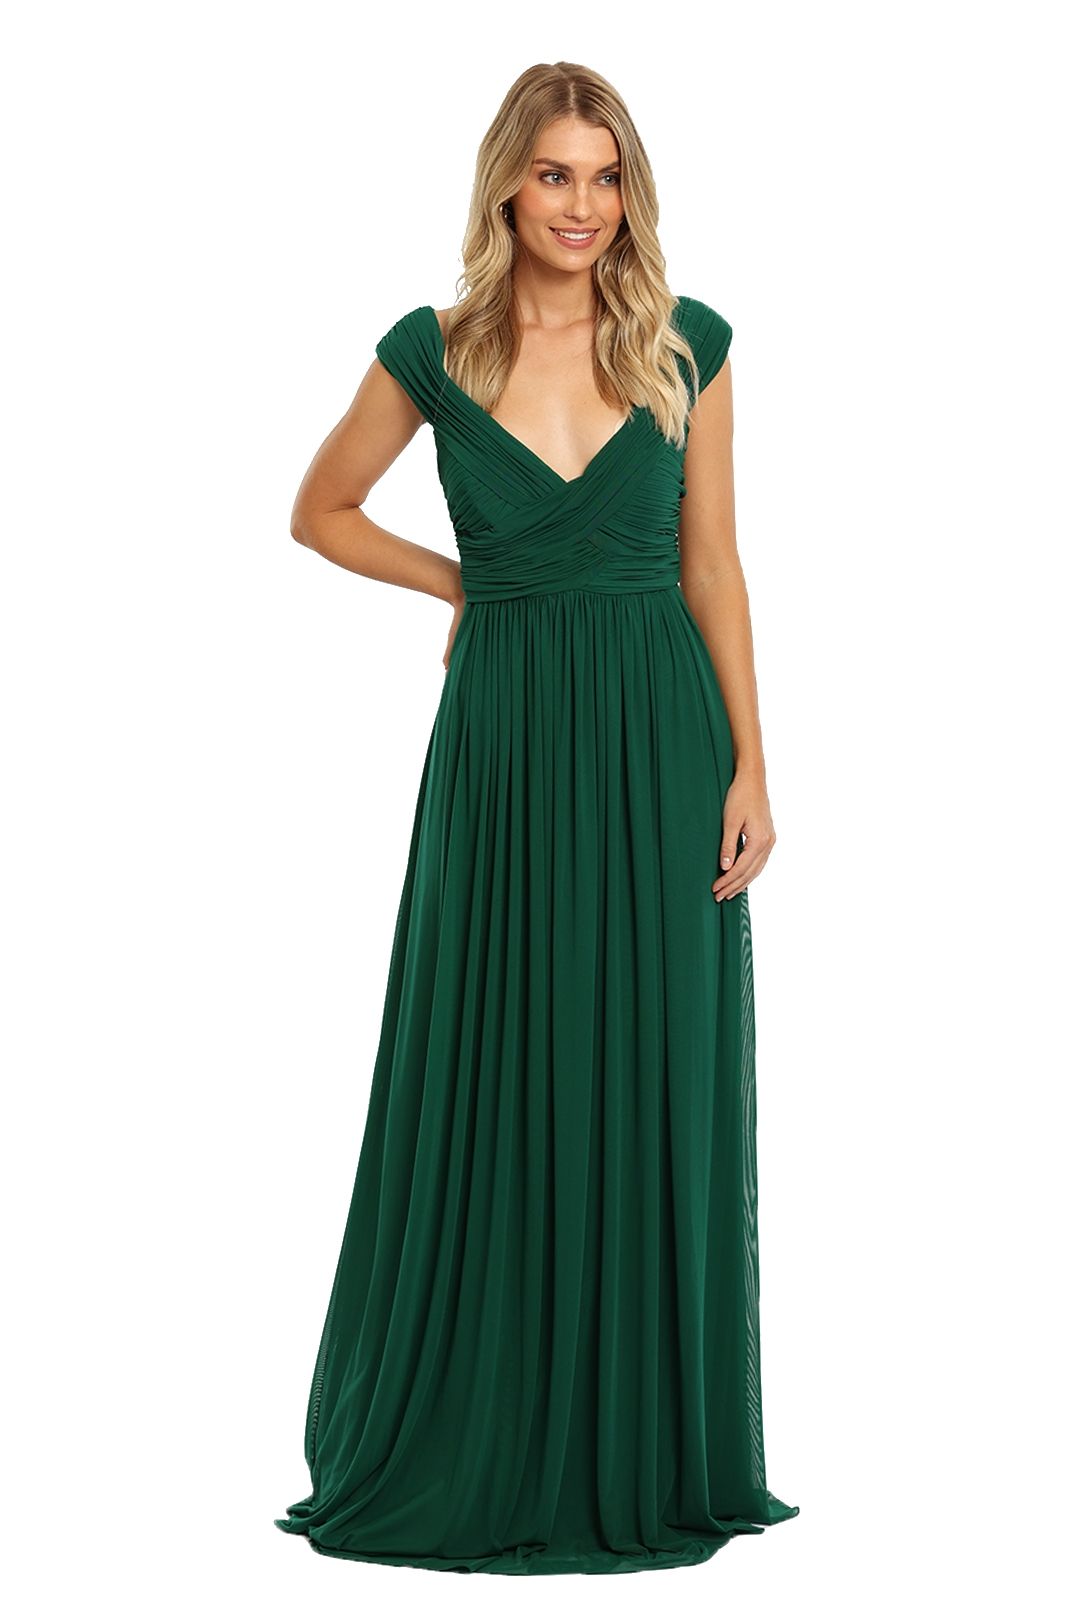 Tania Olsen Molly Gown Emerald green